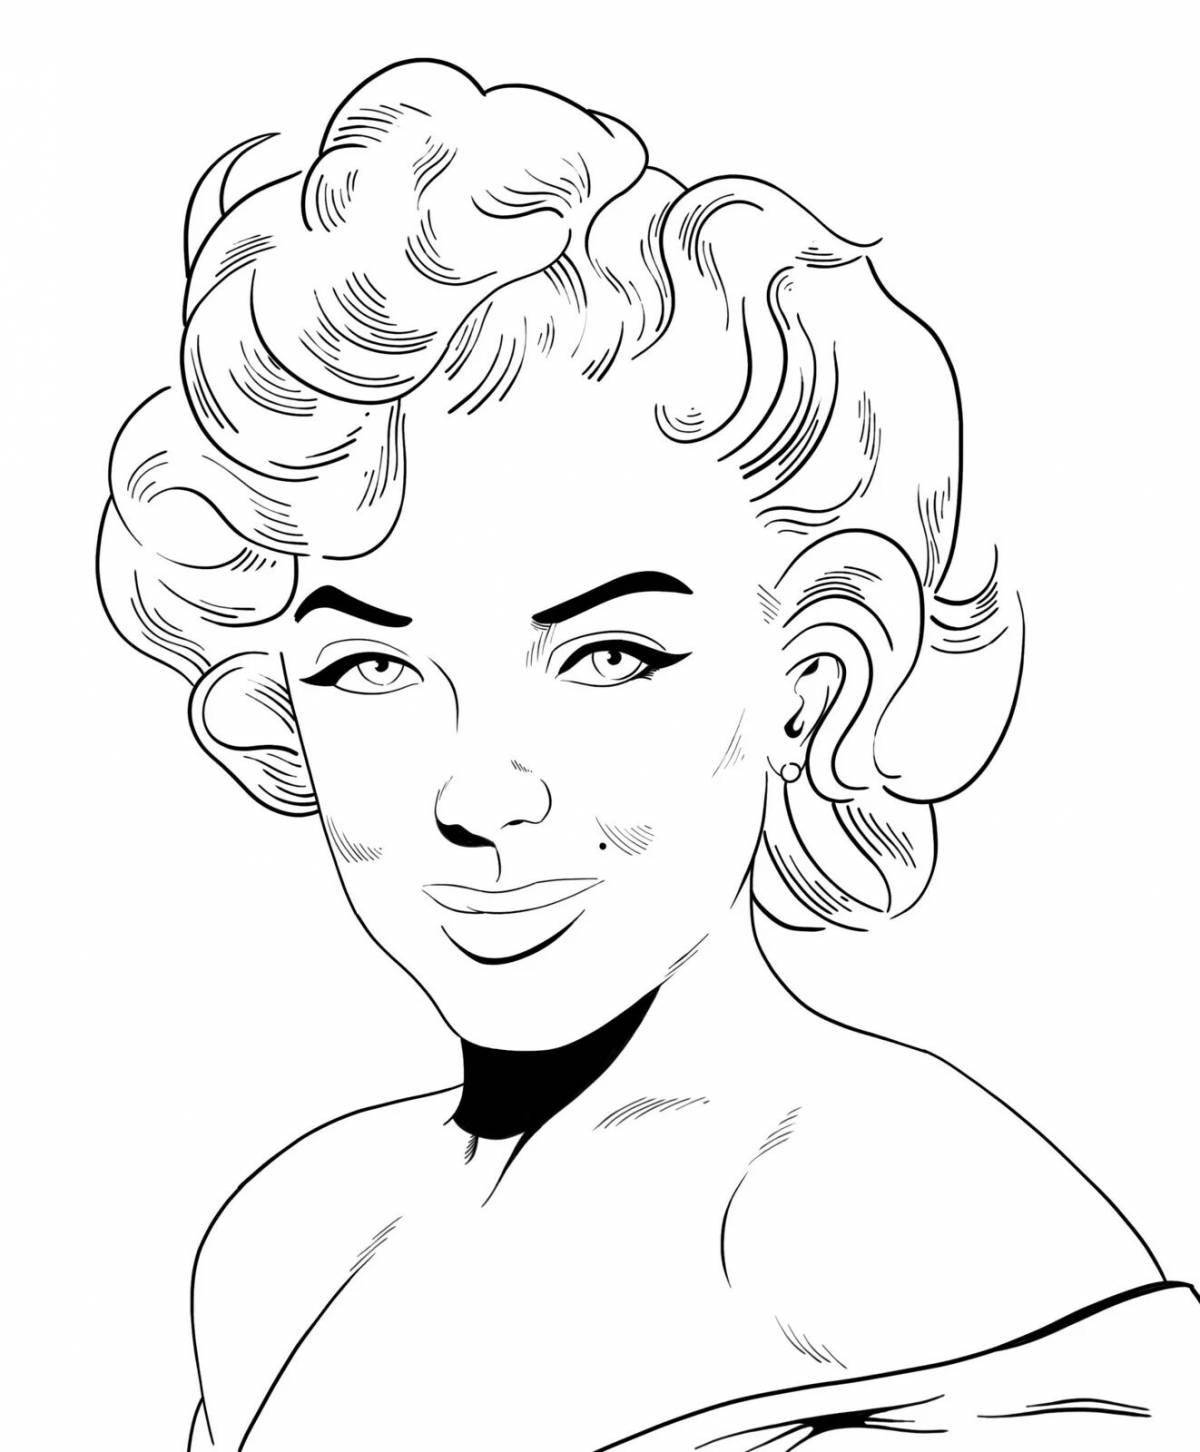 Marilyn Monroe coloring book filled with paint